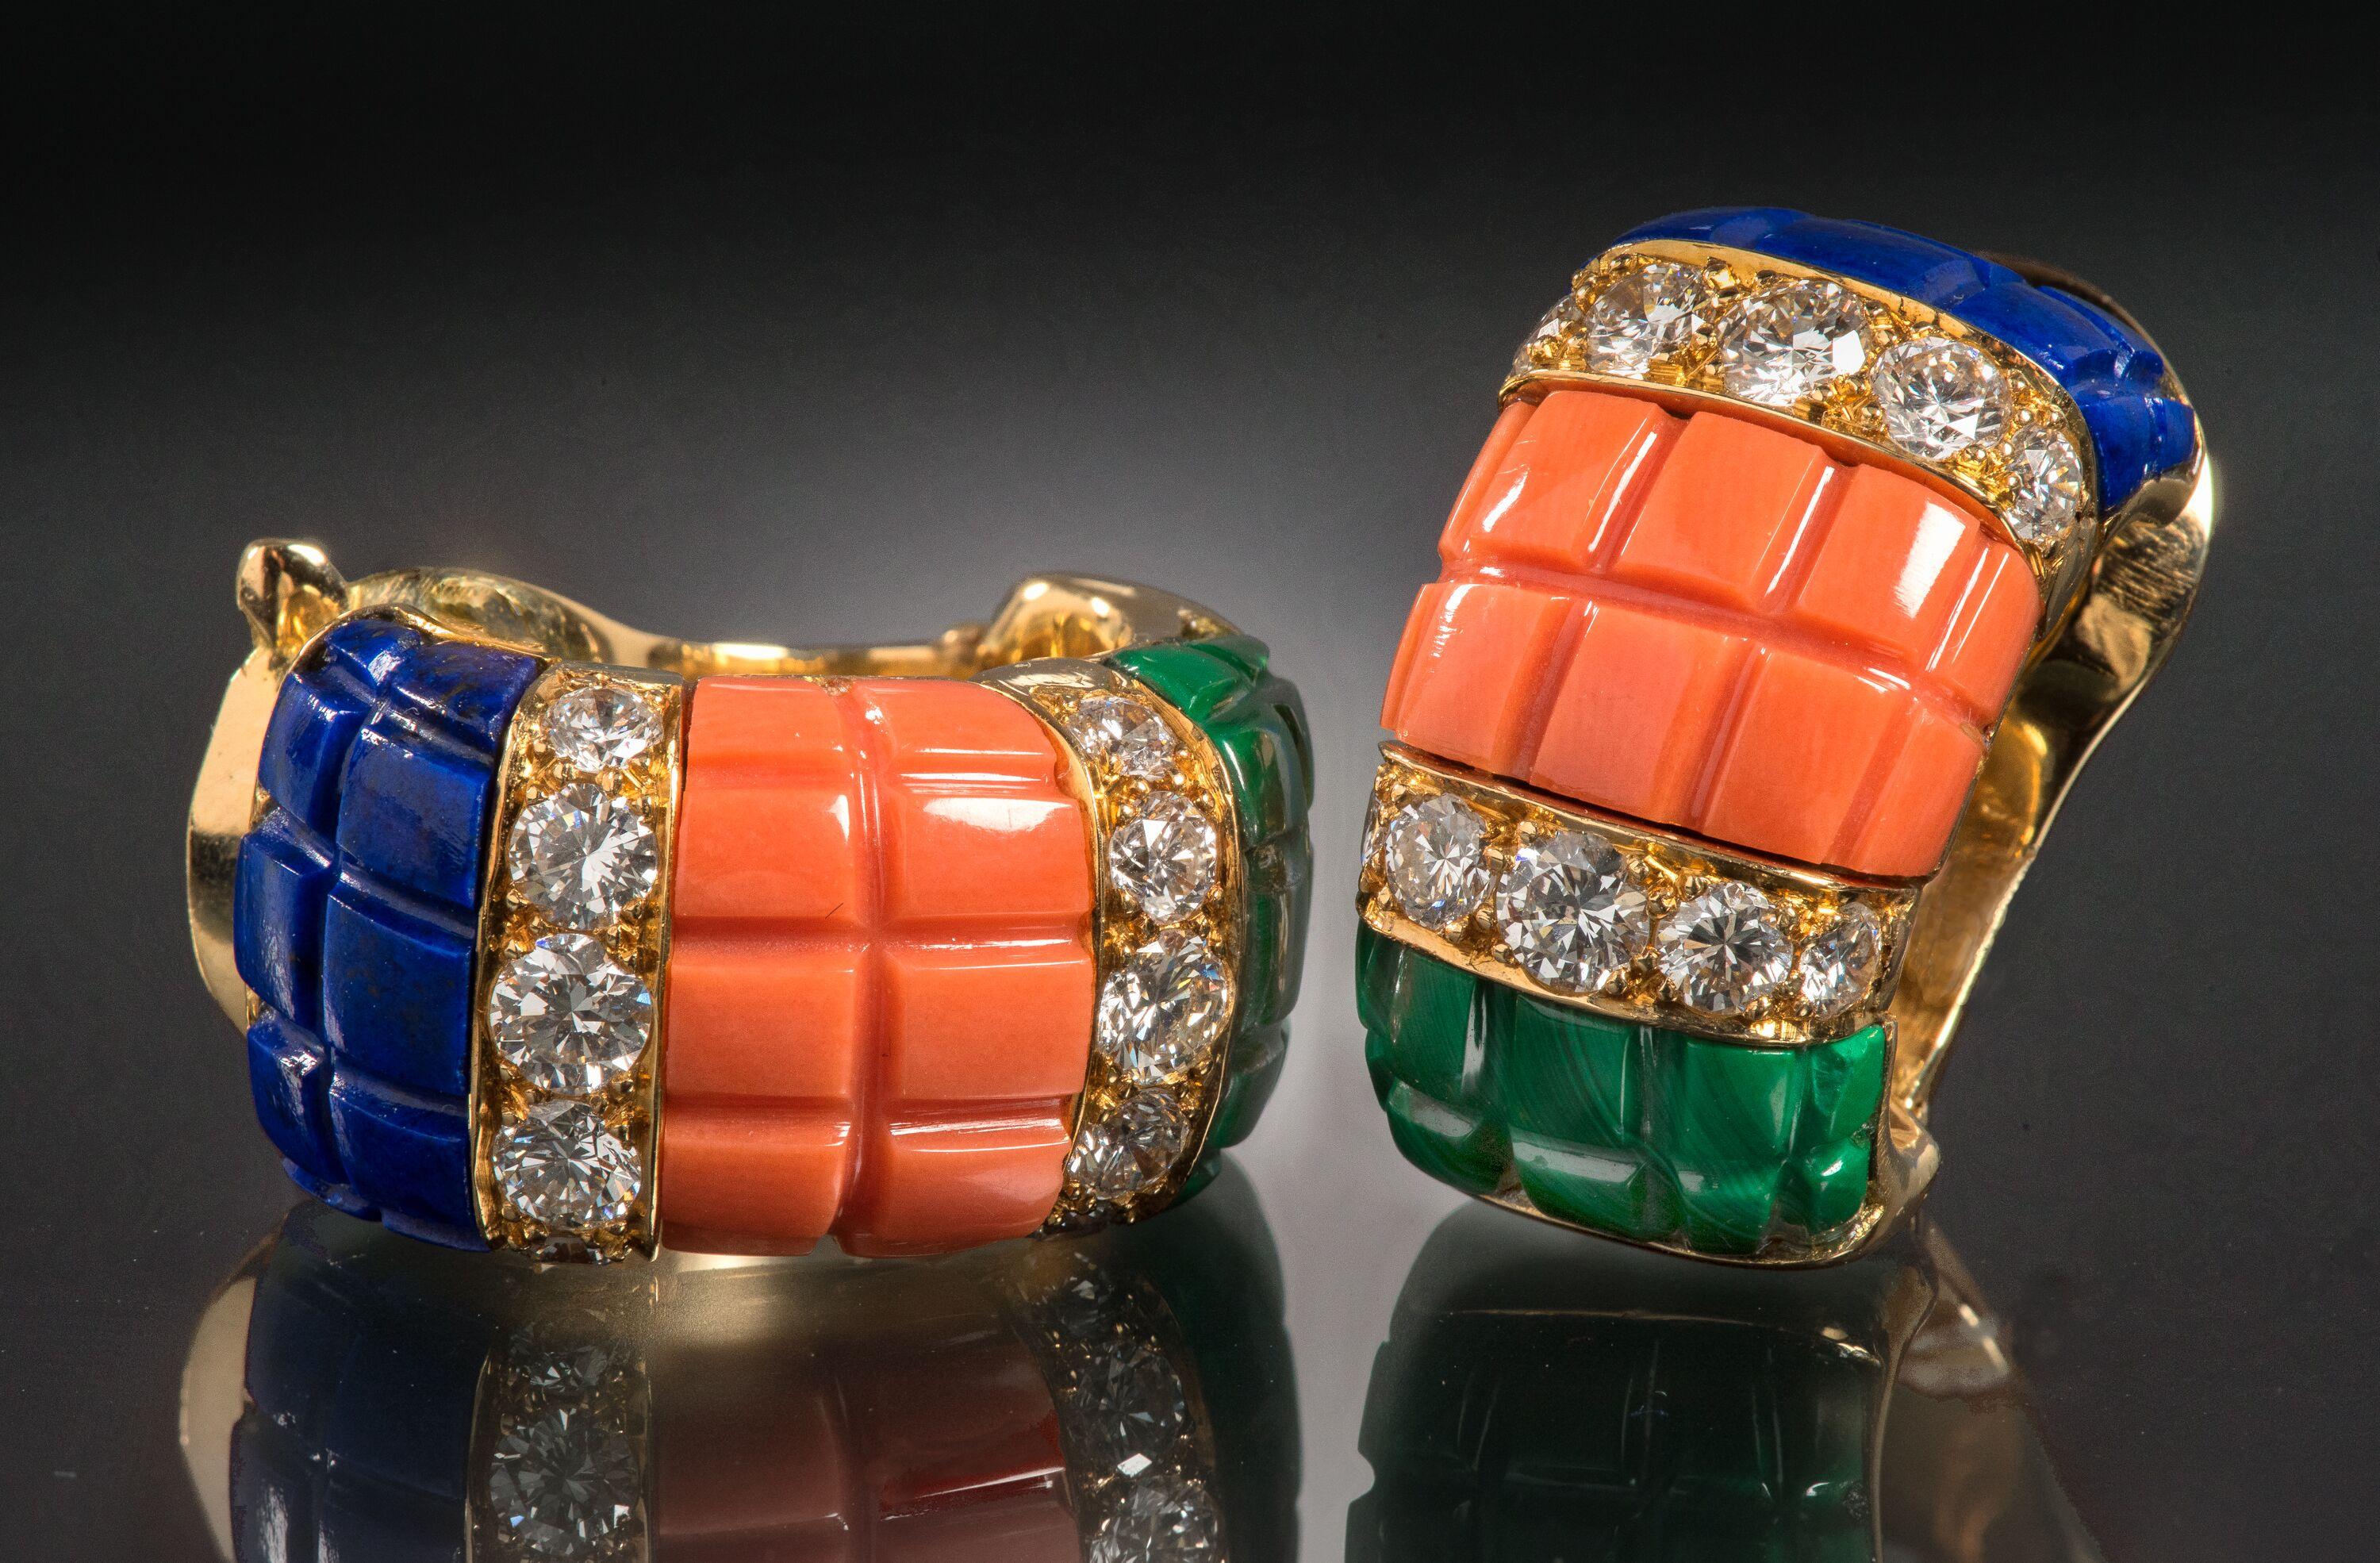 These ear clips demonstrate Van Cleef & Arpels’ mastery of materials. Deep shades of coral, malachite and lapis lazuli are accented by bright white diamonds set into 18k gold. 

Approximately 0.80 inches long
Signed VCA, numbered NY 8K605-75
Made in